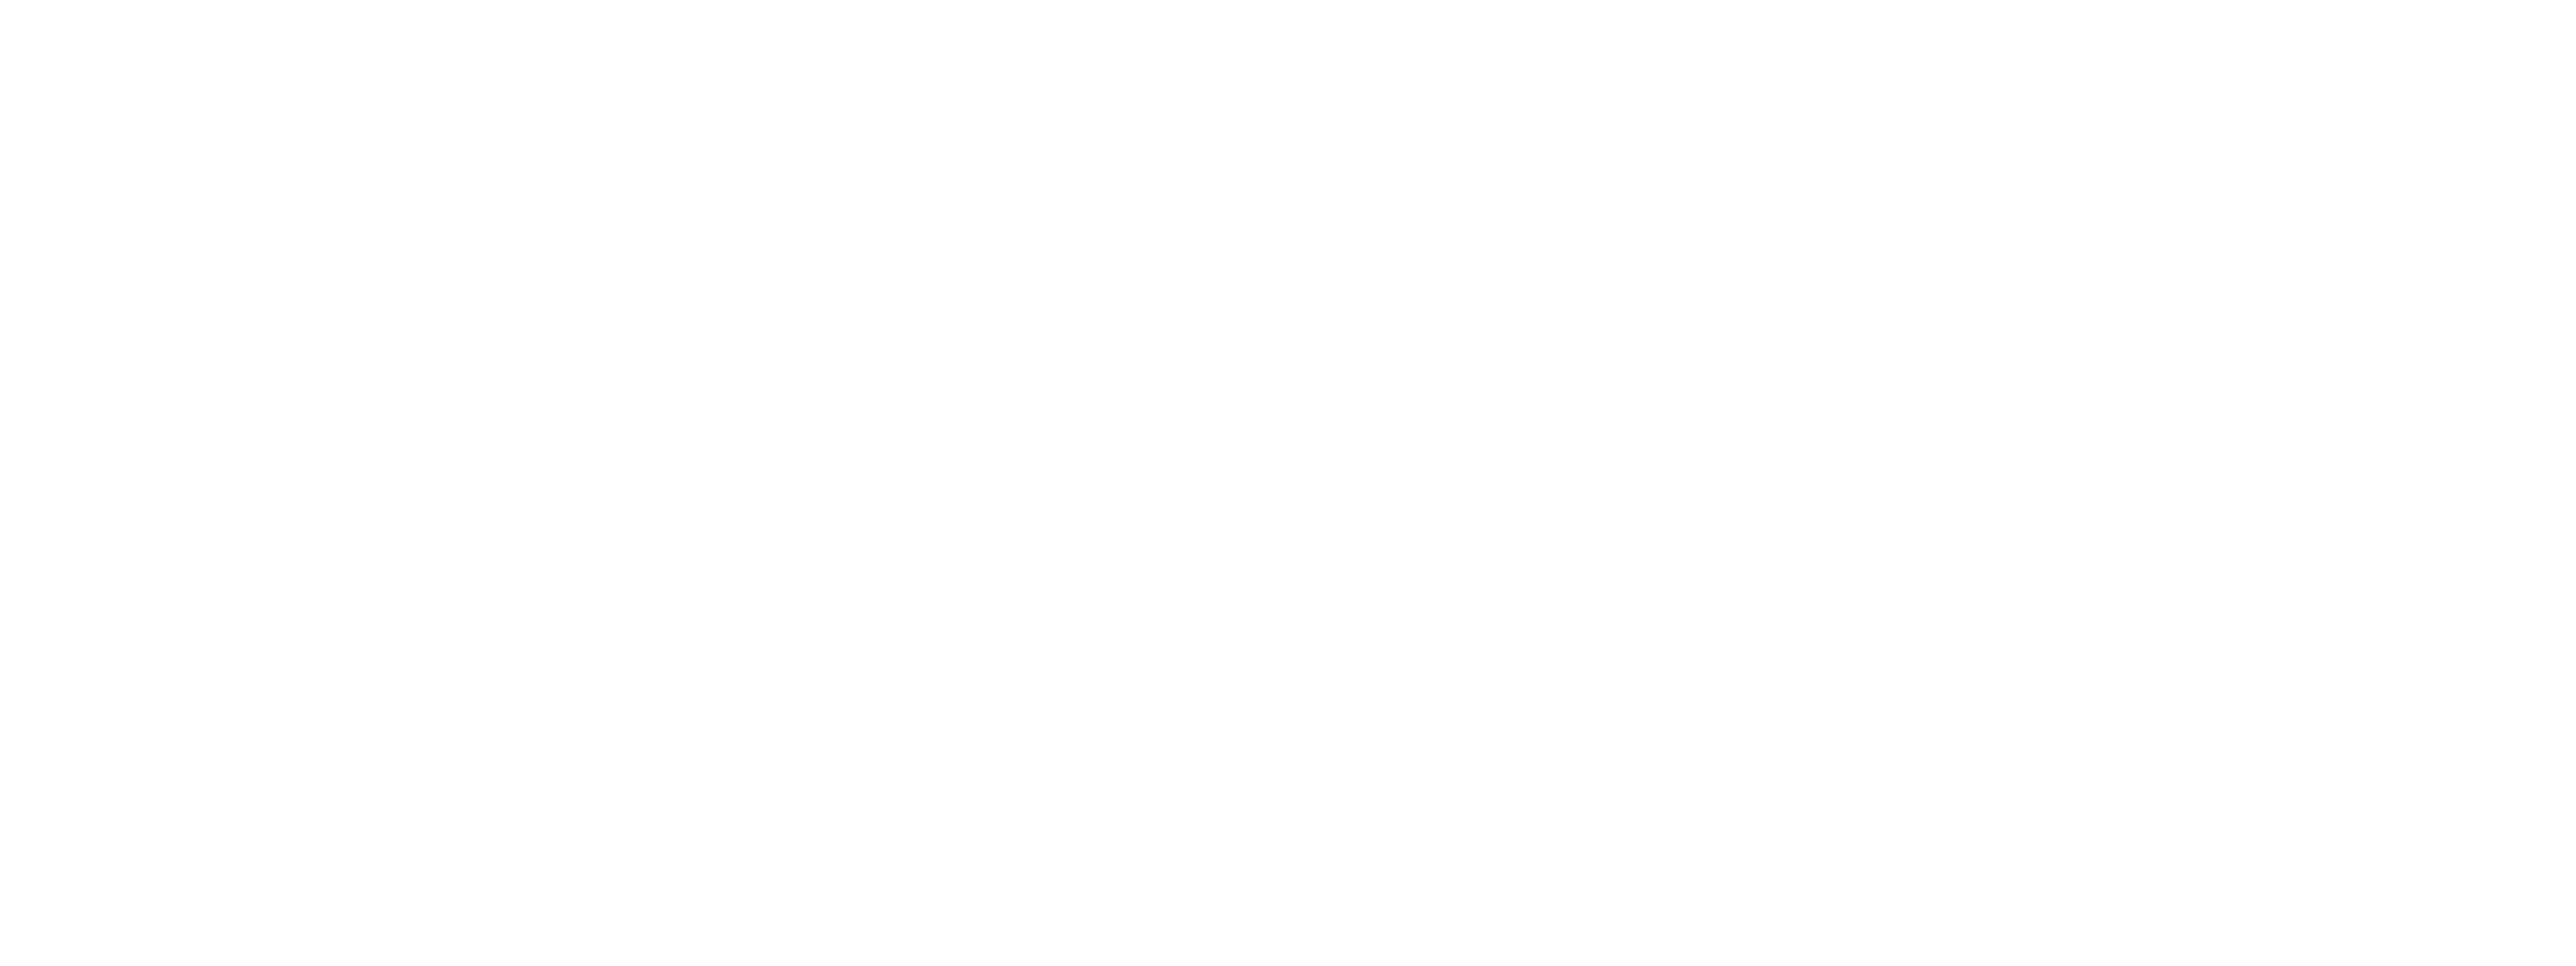 Christie & Co. Property Group